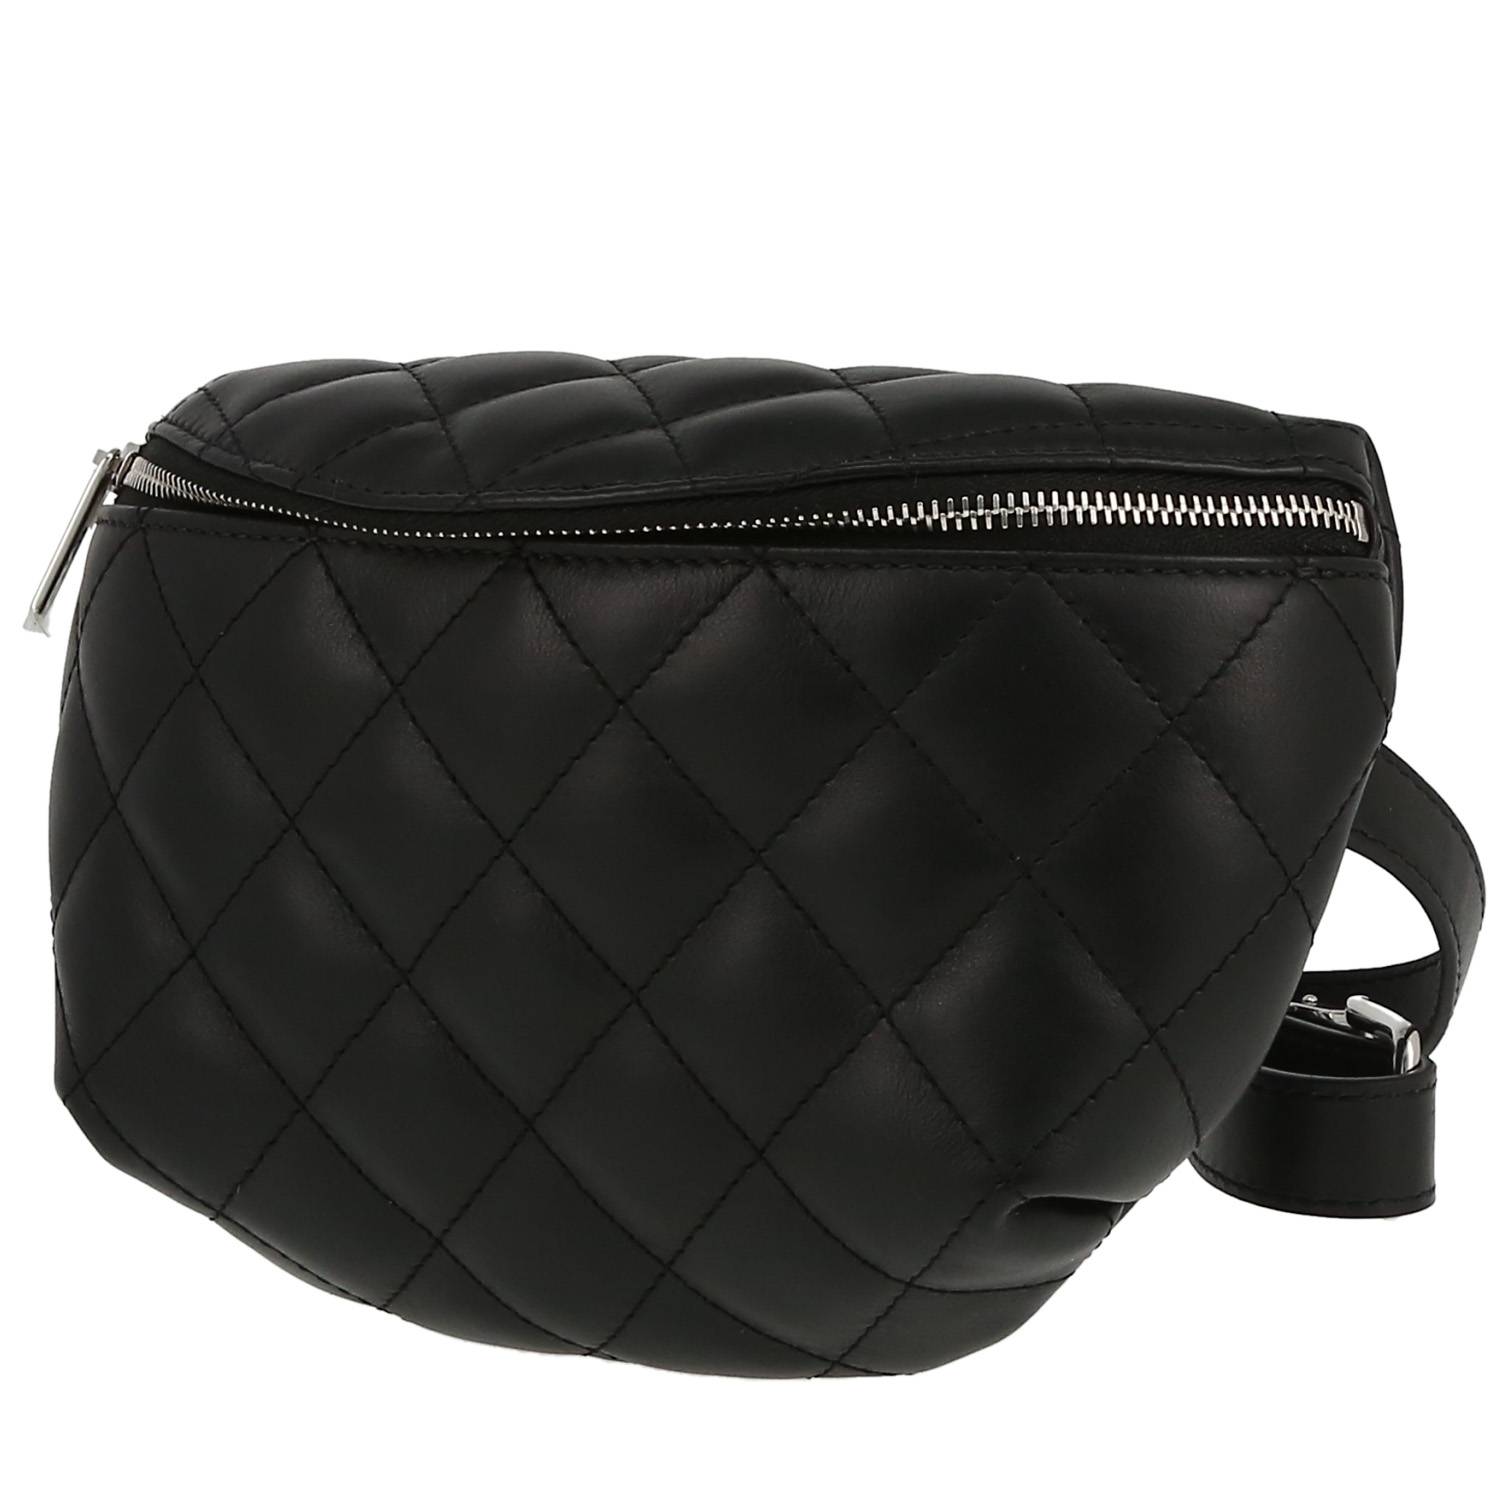 YSL Mini Leather Bag Luxe Design, Quilted Lambskin, 23cm Size, Crossbody &  Shoulder Handbag For Women From Marcjacobsbags, $84.16 | DHgate.Com